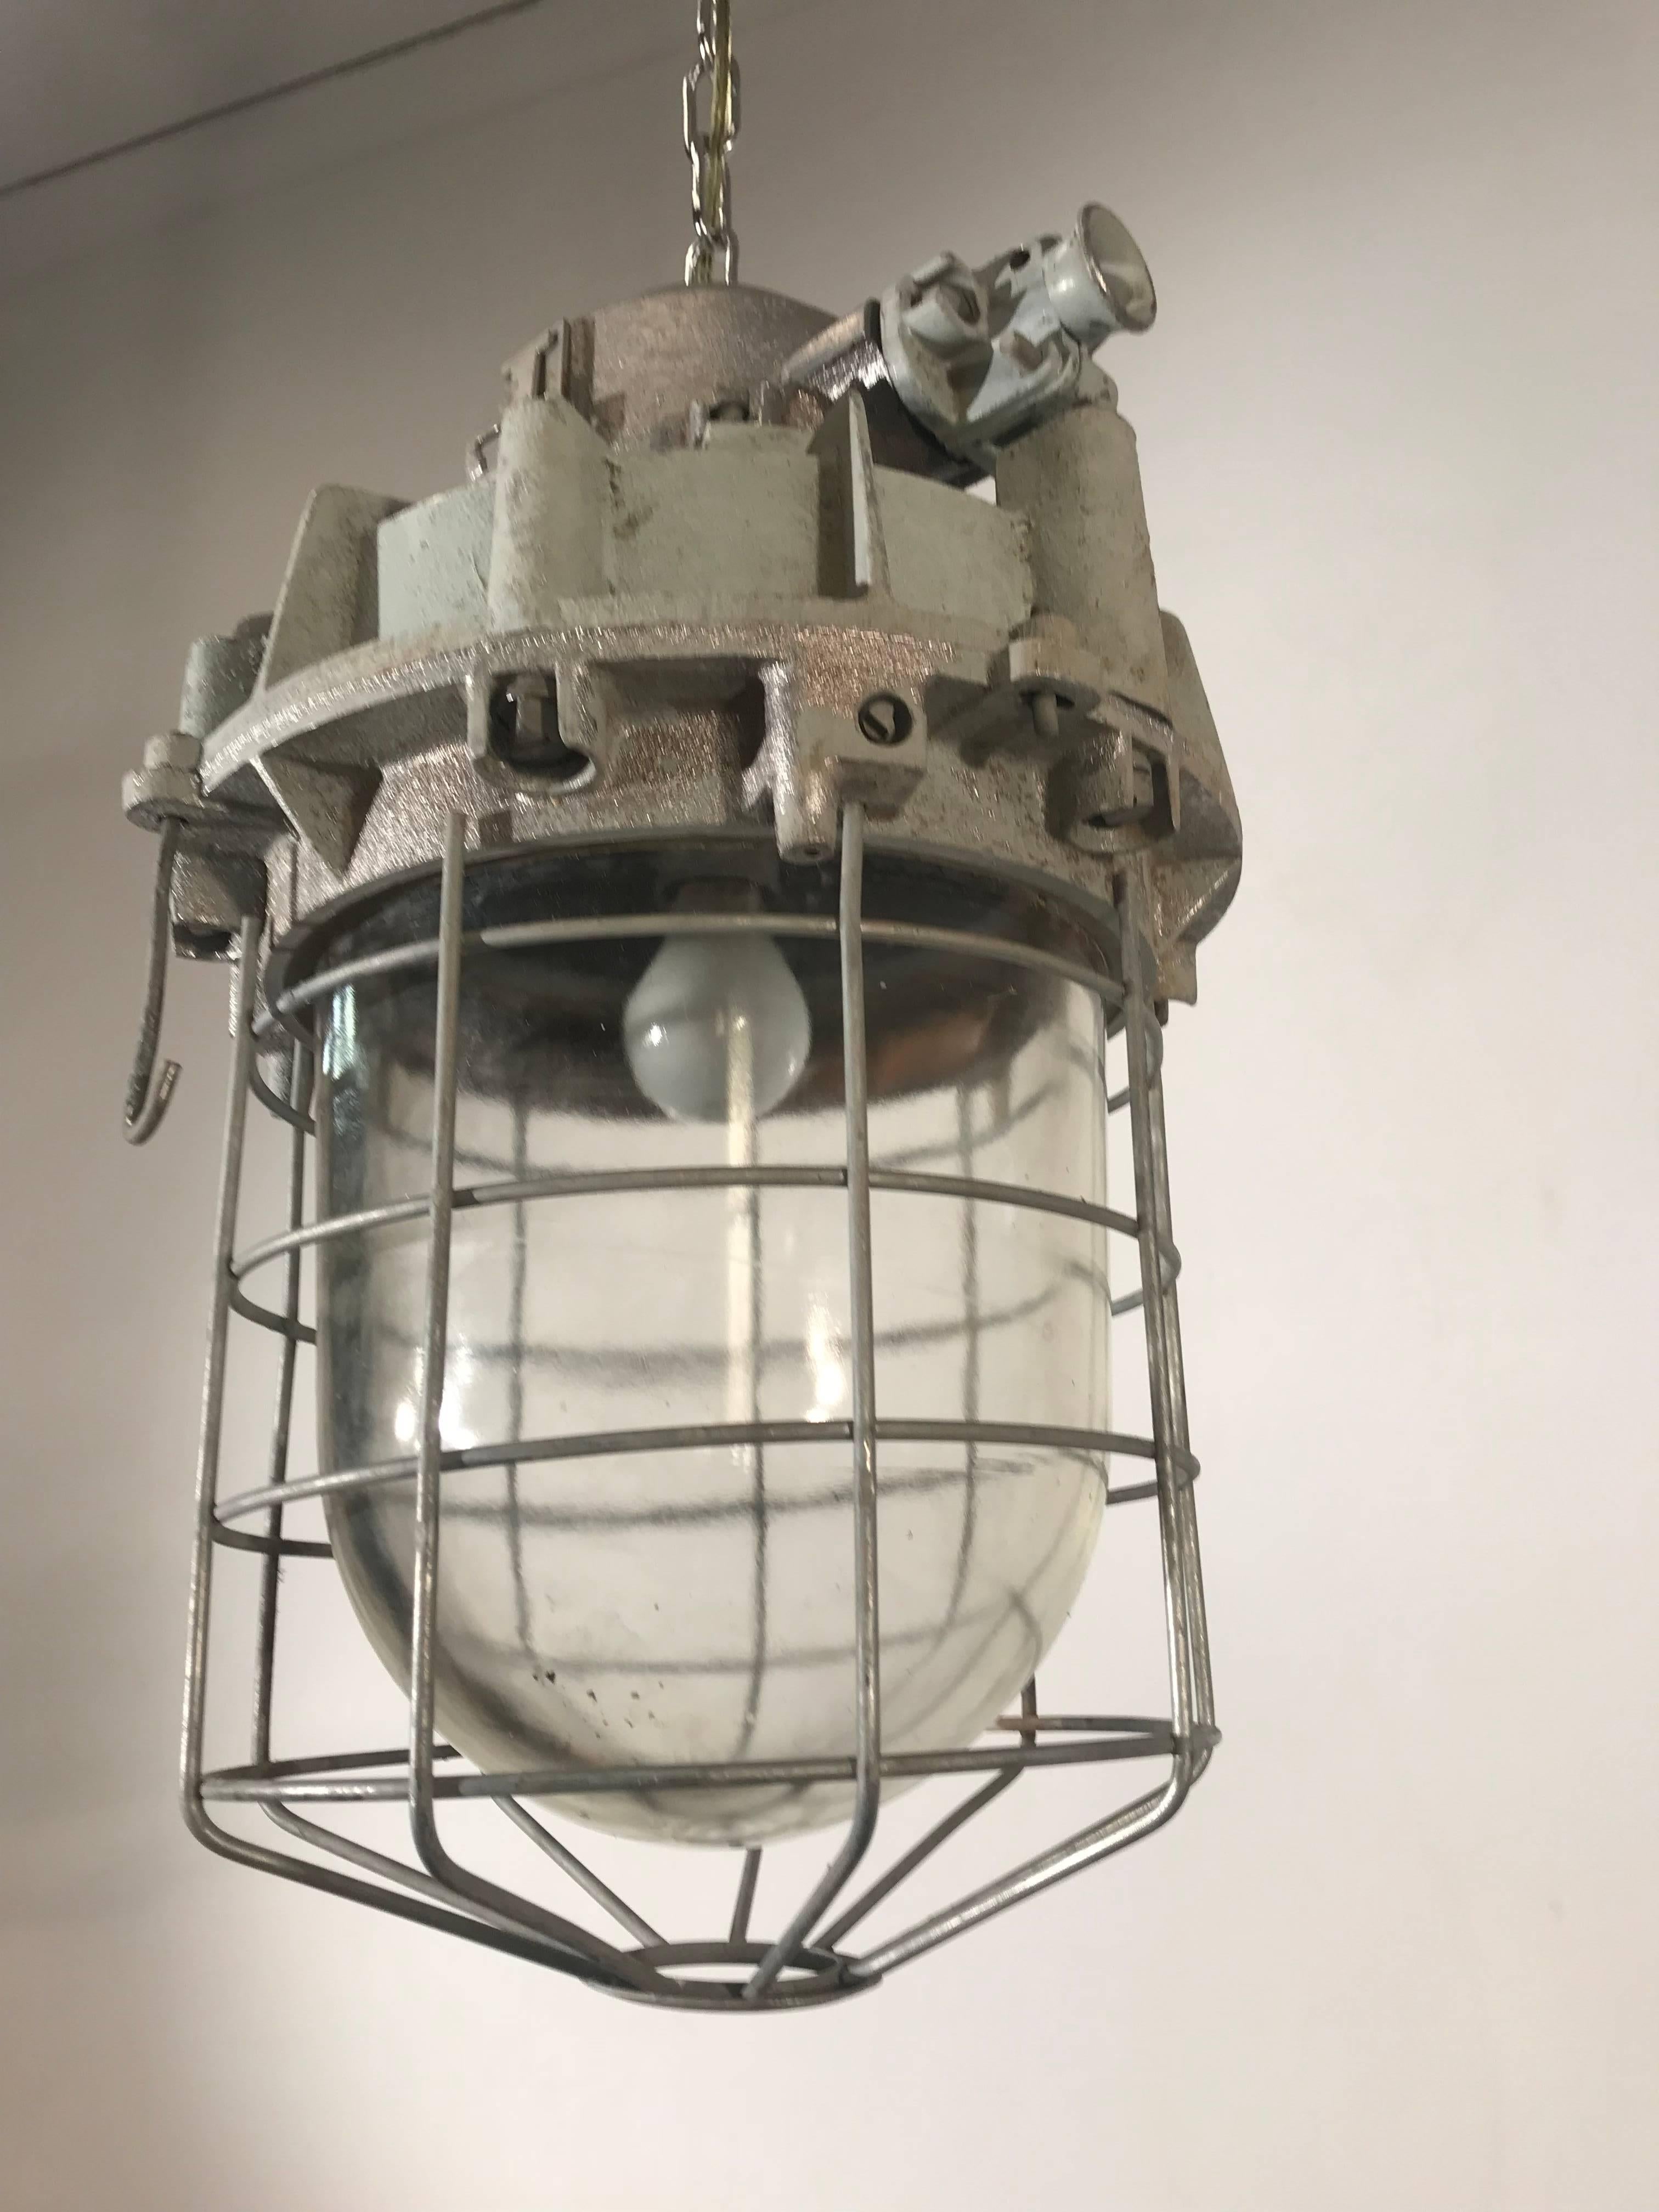 Original, heavy duty industrial factory lamp. 

This large and cool Industrial pendant with its original glass shade will look wonderful over a kitchen island, but there are many other spaces and places where this good looking and authentic fixture